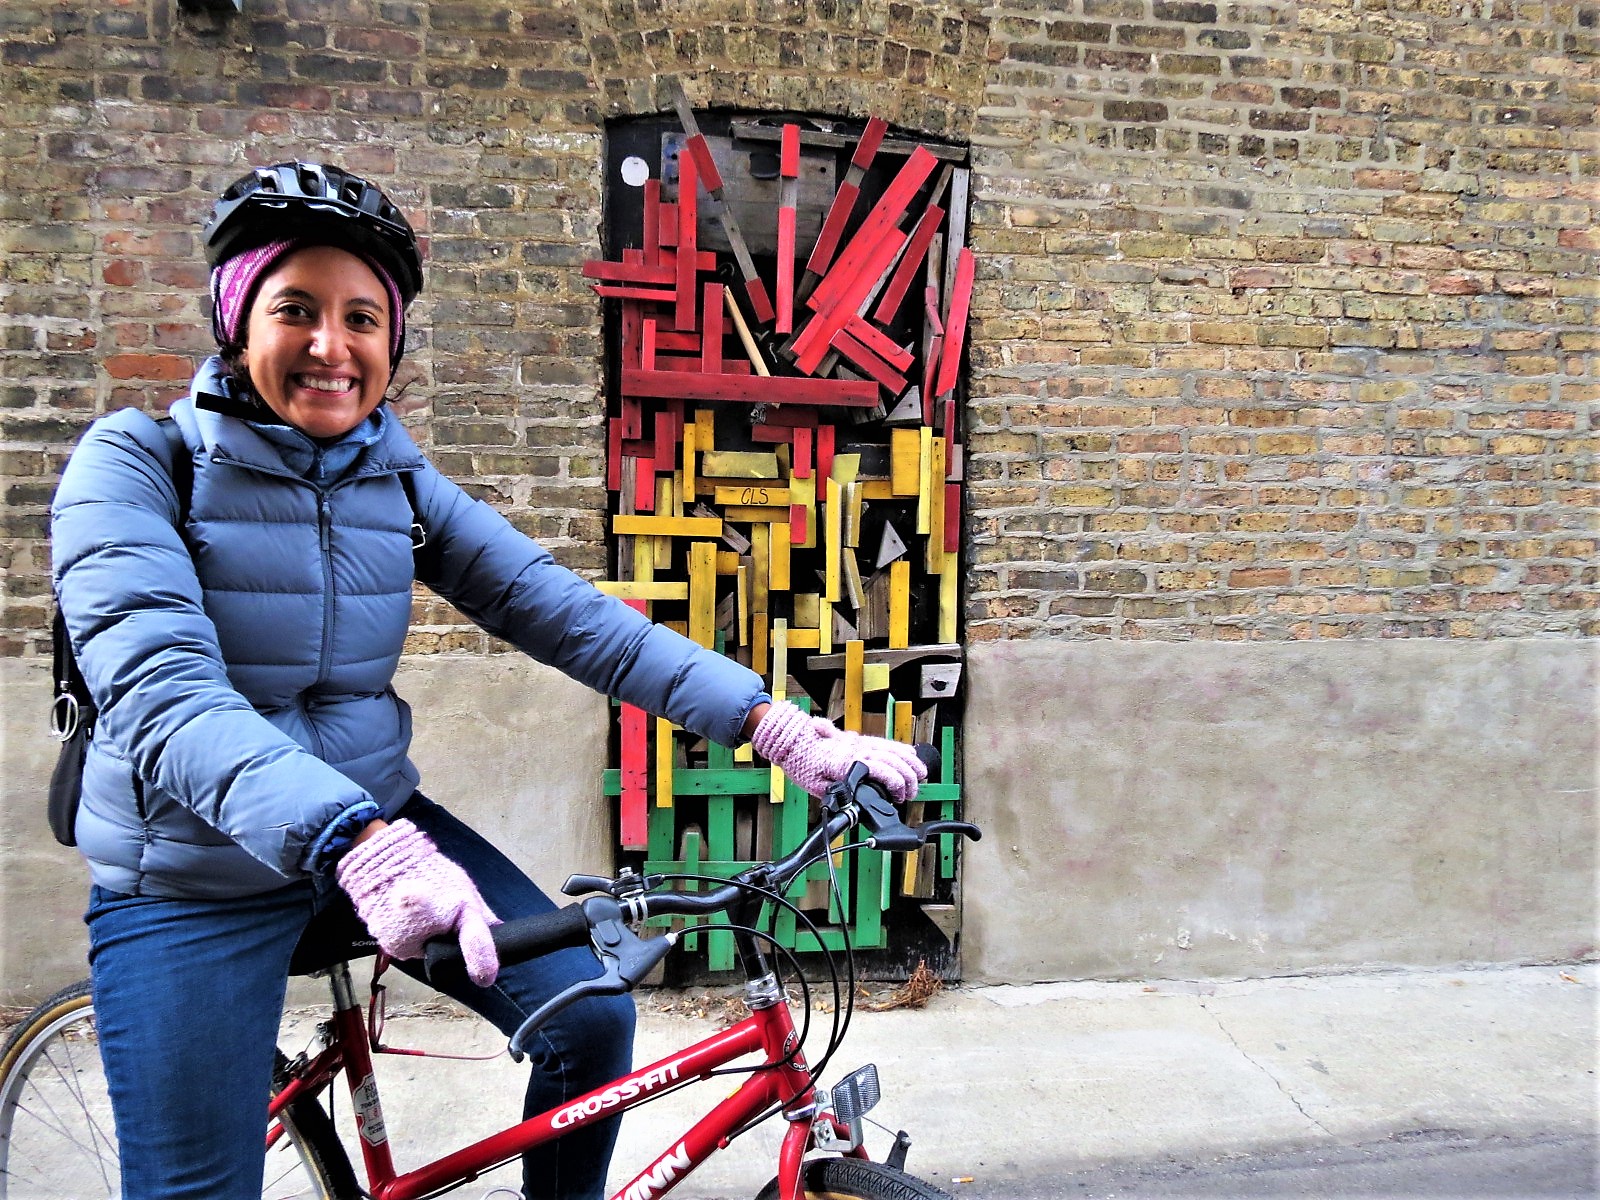 A helmeted CBA bike tour rider in front of an alley door covered in an abstract pattern of green, red, and yellow wooden slats smiling and looking at the camera.